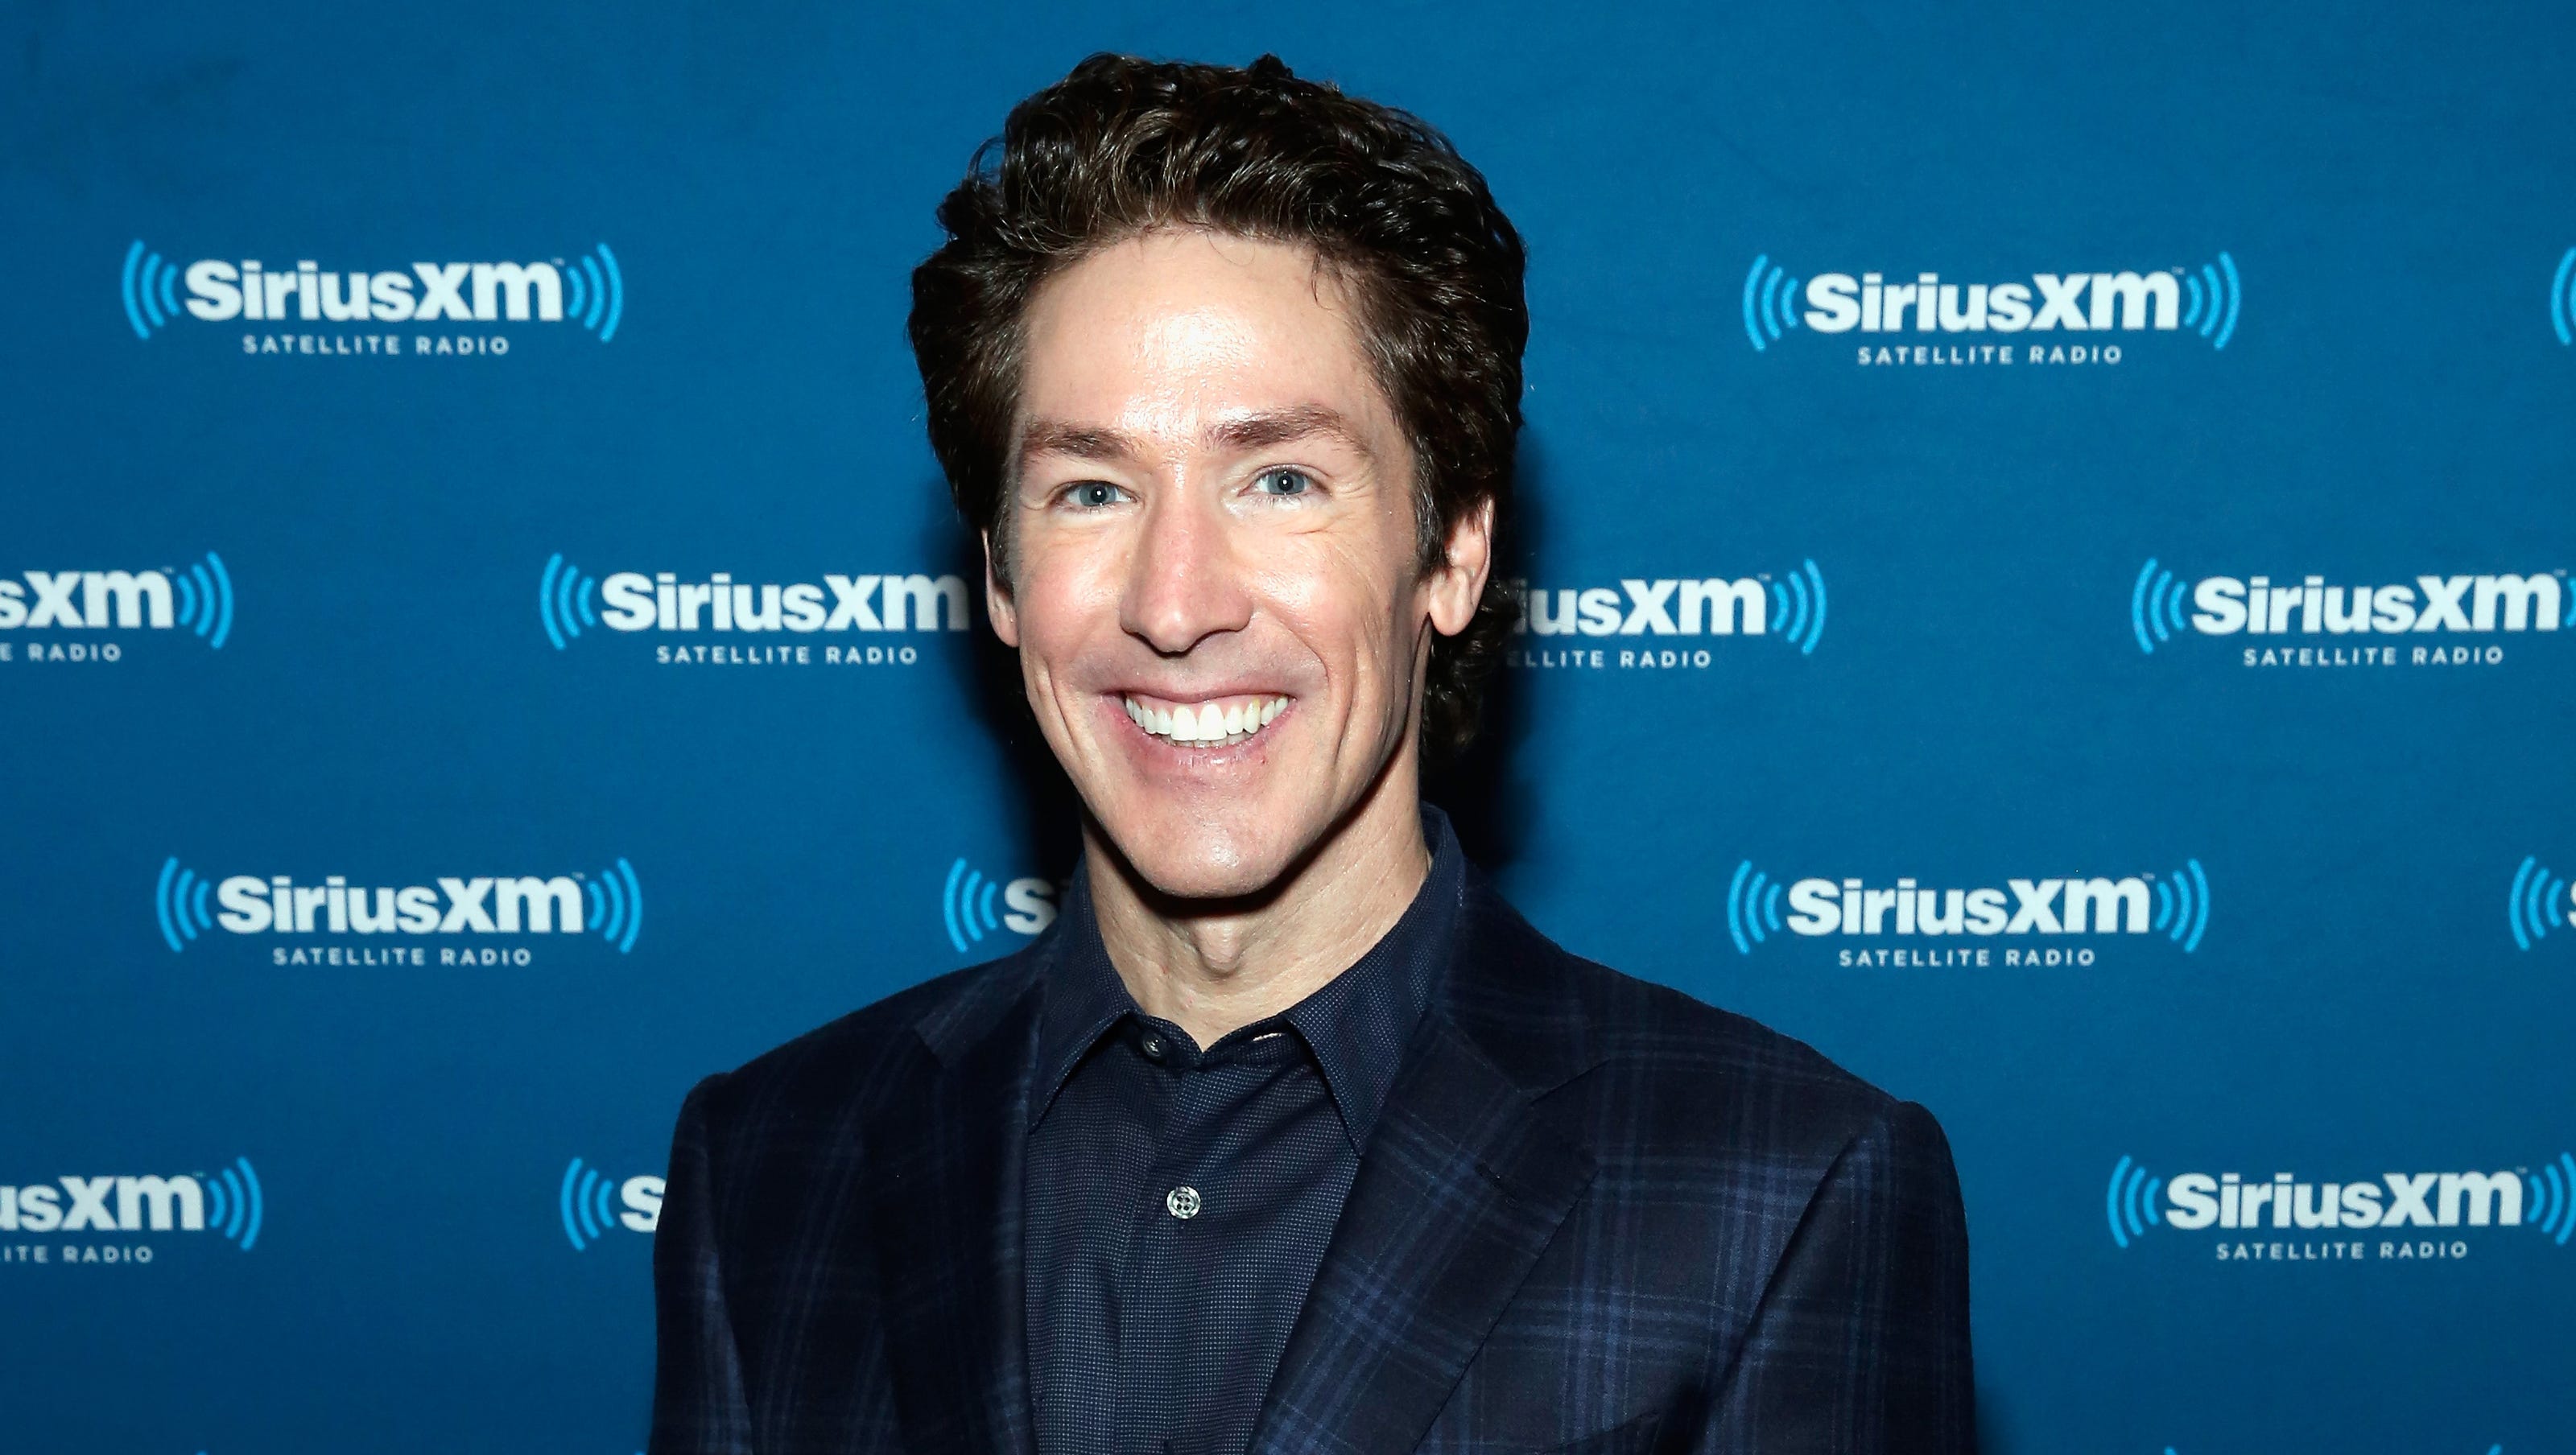 Plumber finds stash of envelopes with cash, checks at Joel Osteen's Lakewood Church in Houston